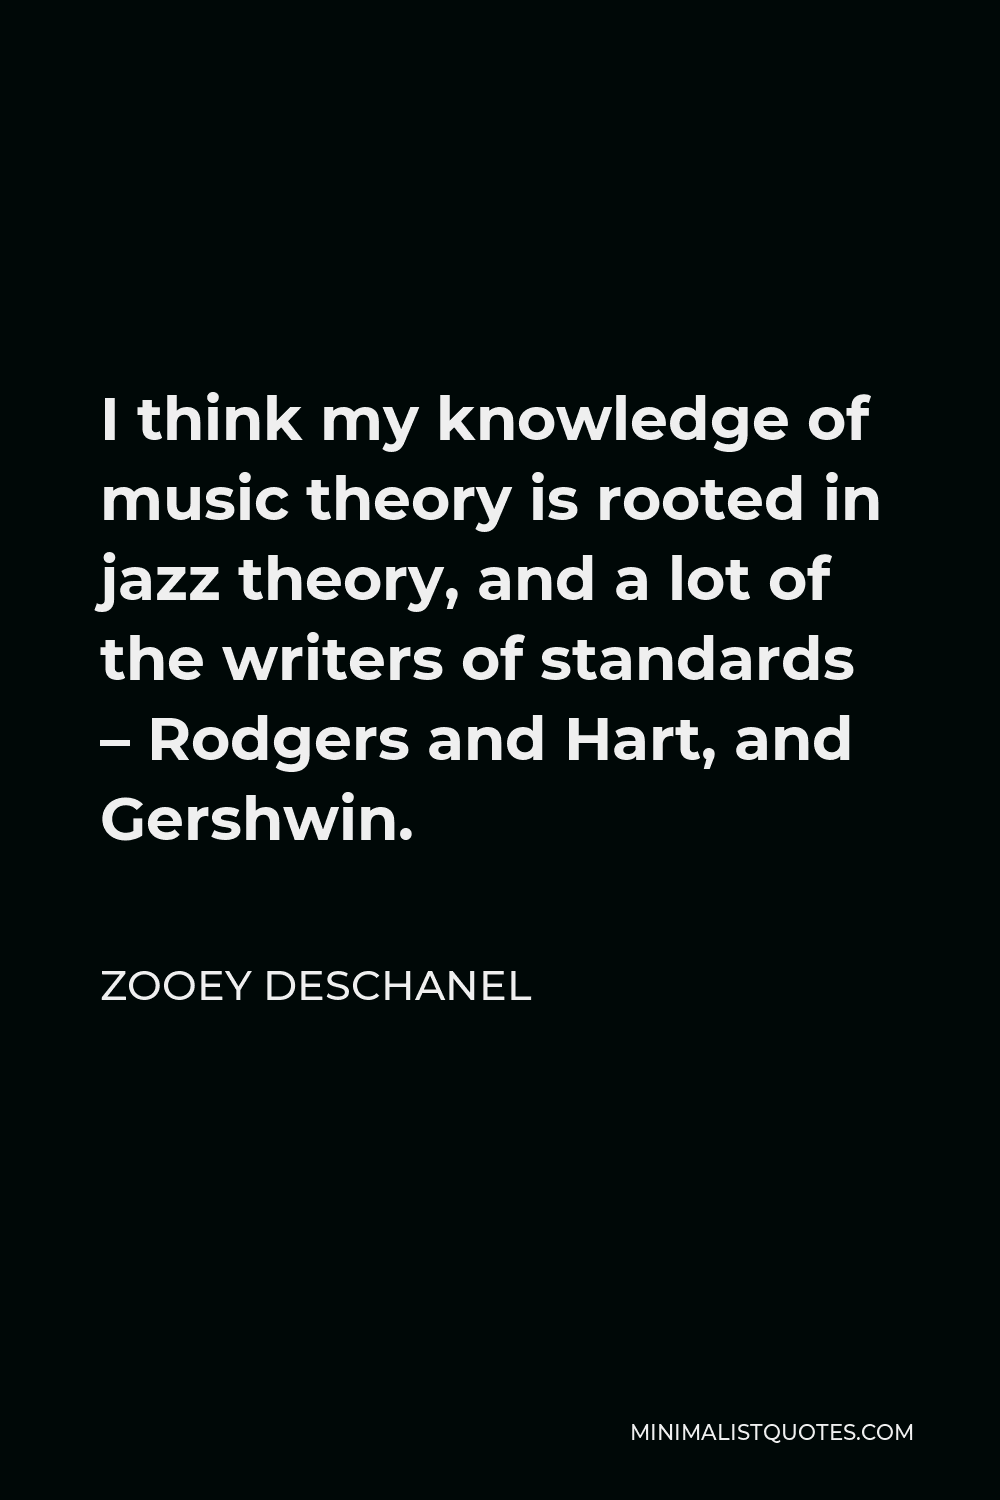 Zooey Deschanel Quote - I think my knowledge of music theory is rooted in jazz theory, and a lot of the writers of standards – Rodgers and Hart, and Gershwin.